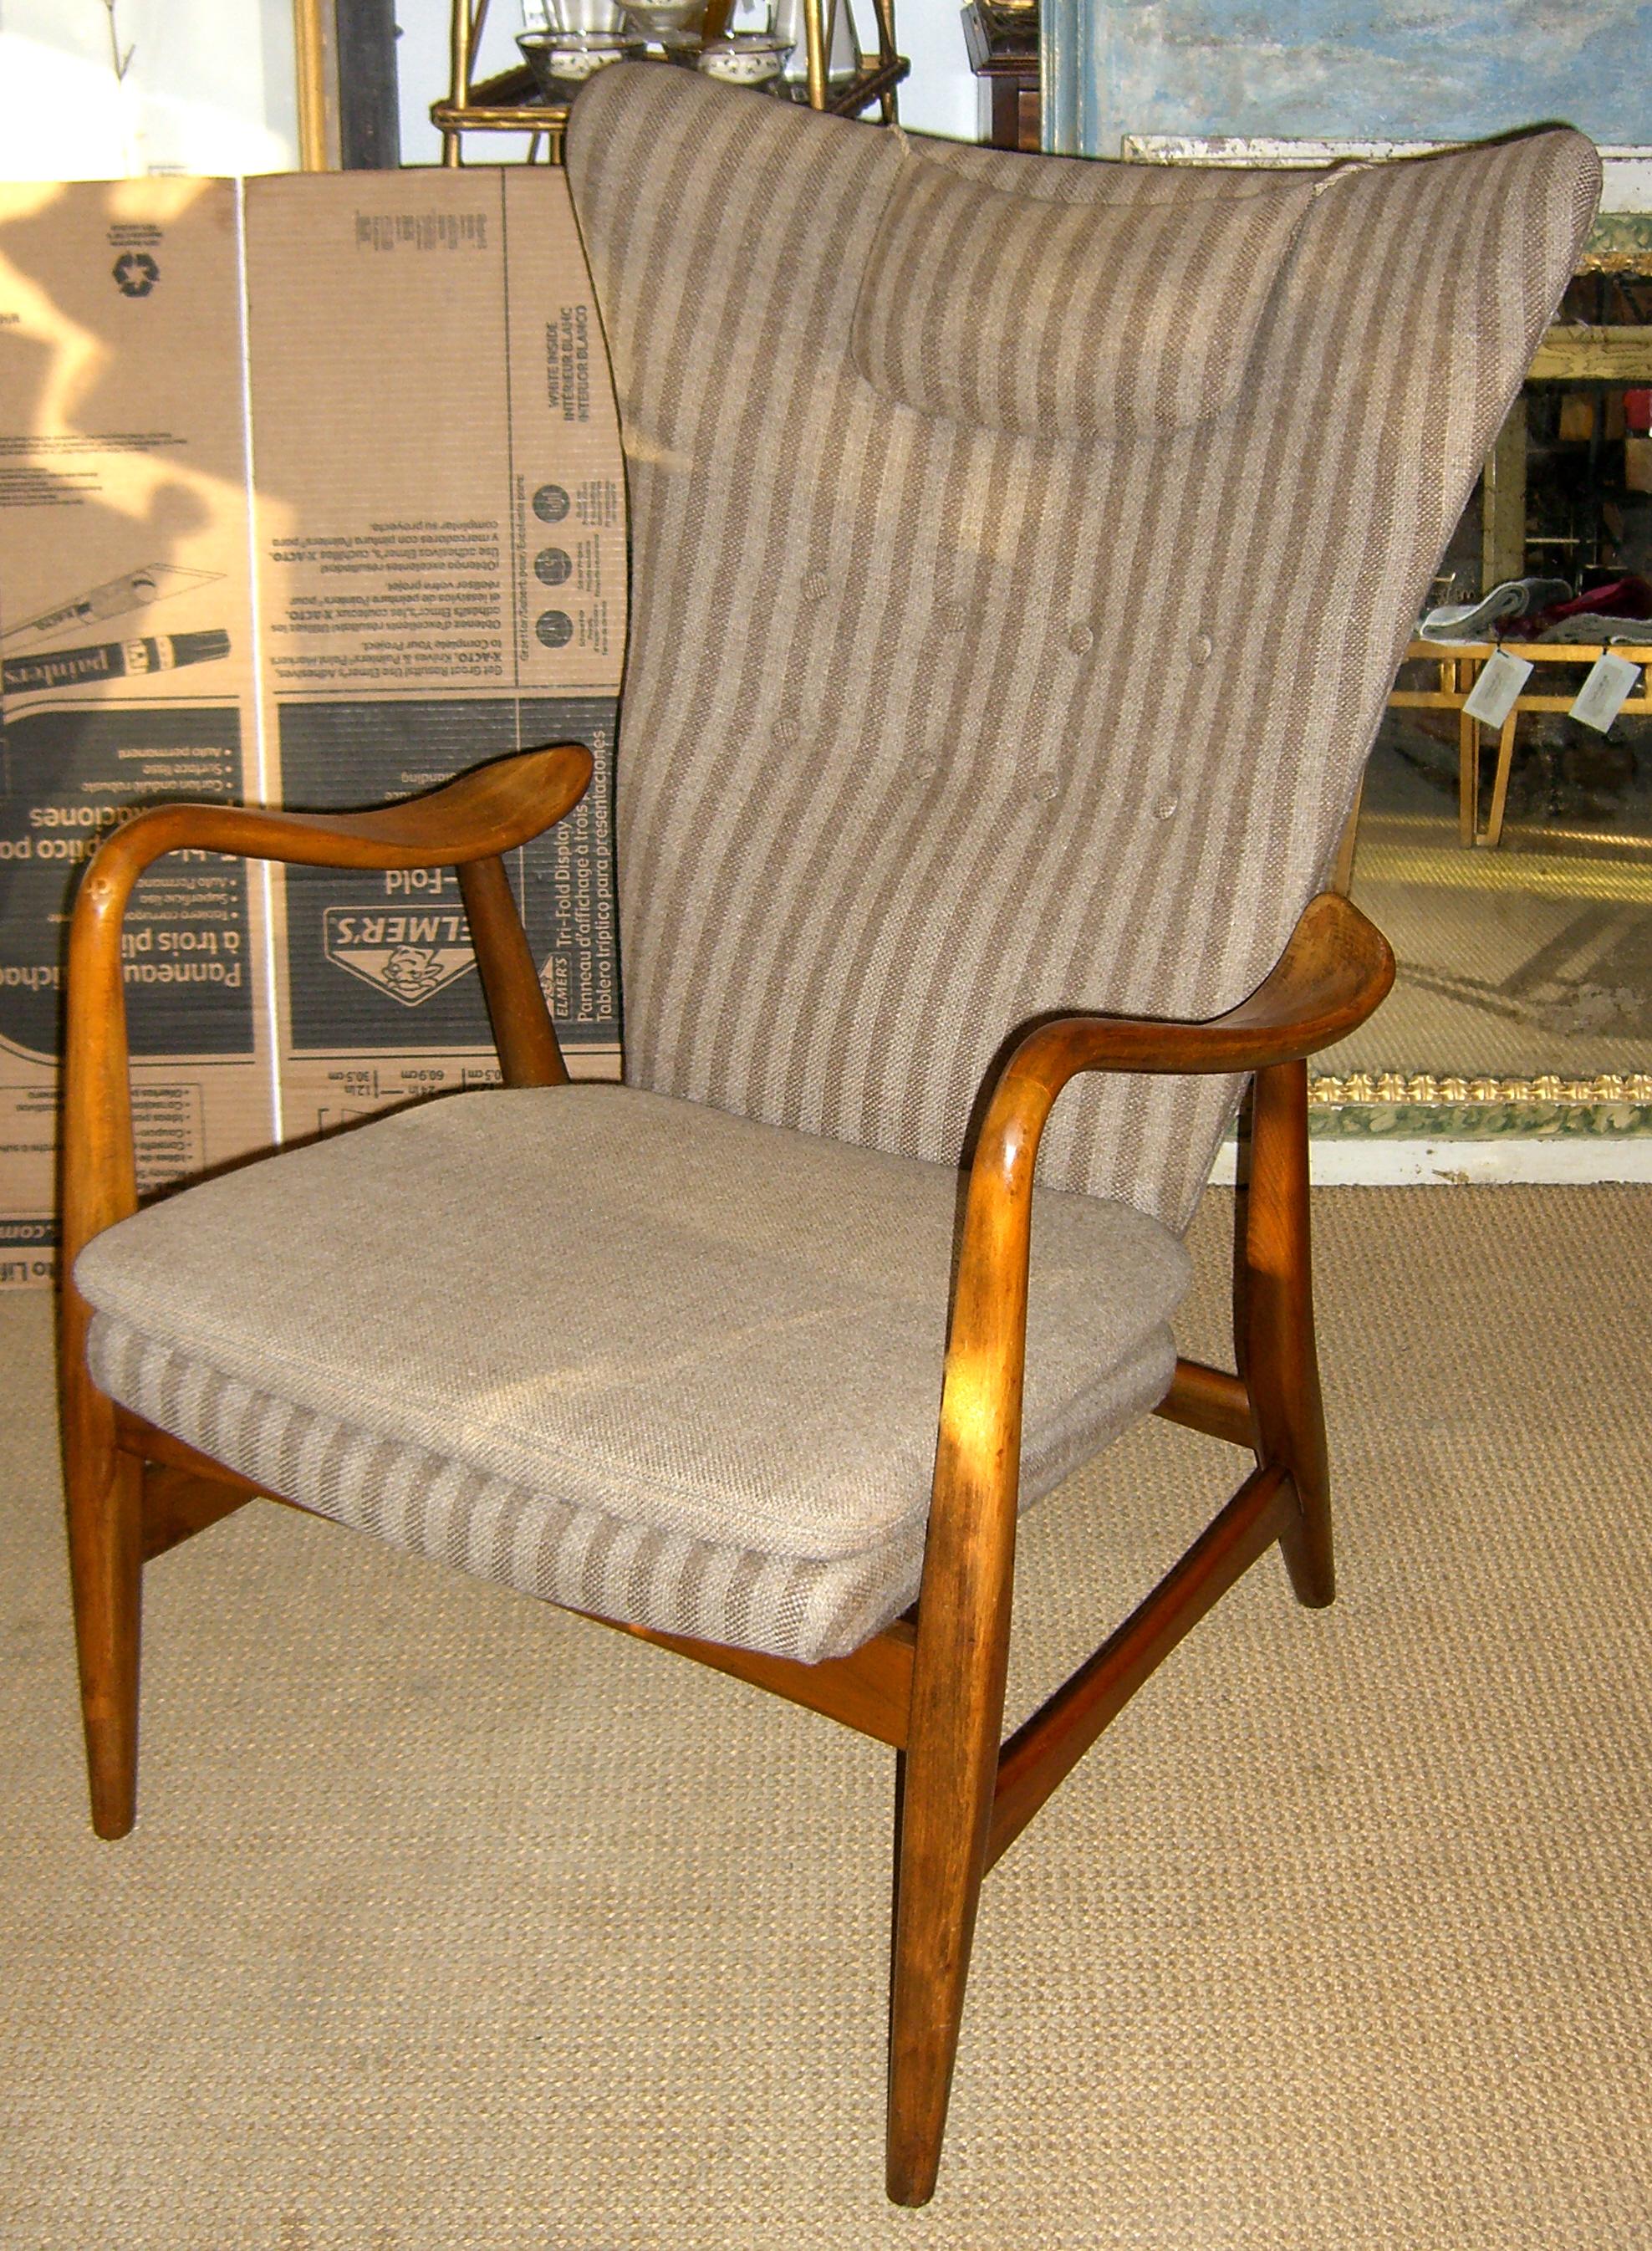 A stunning example of Danish modern design. Produced by Bovenkamp this wing back chair has unique free floating curved arms. The upholstery is original.